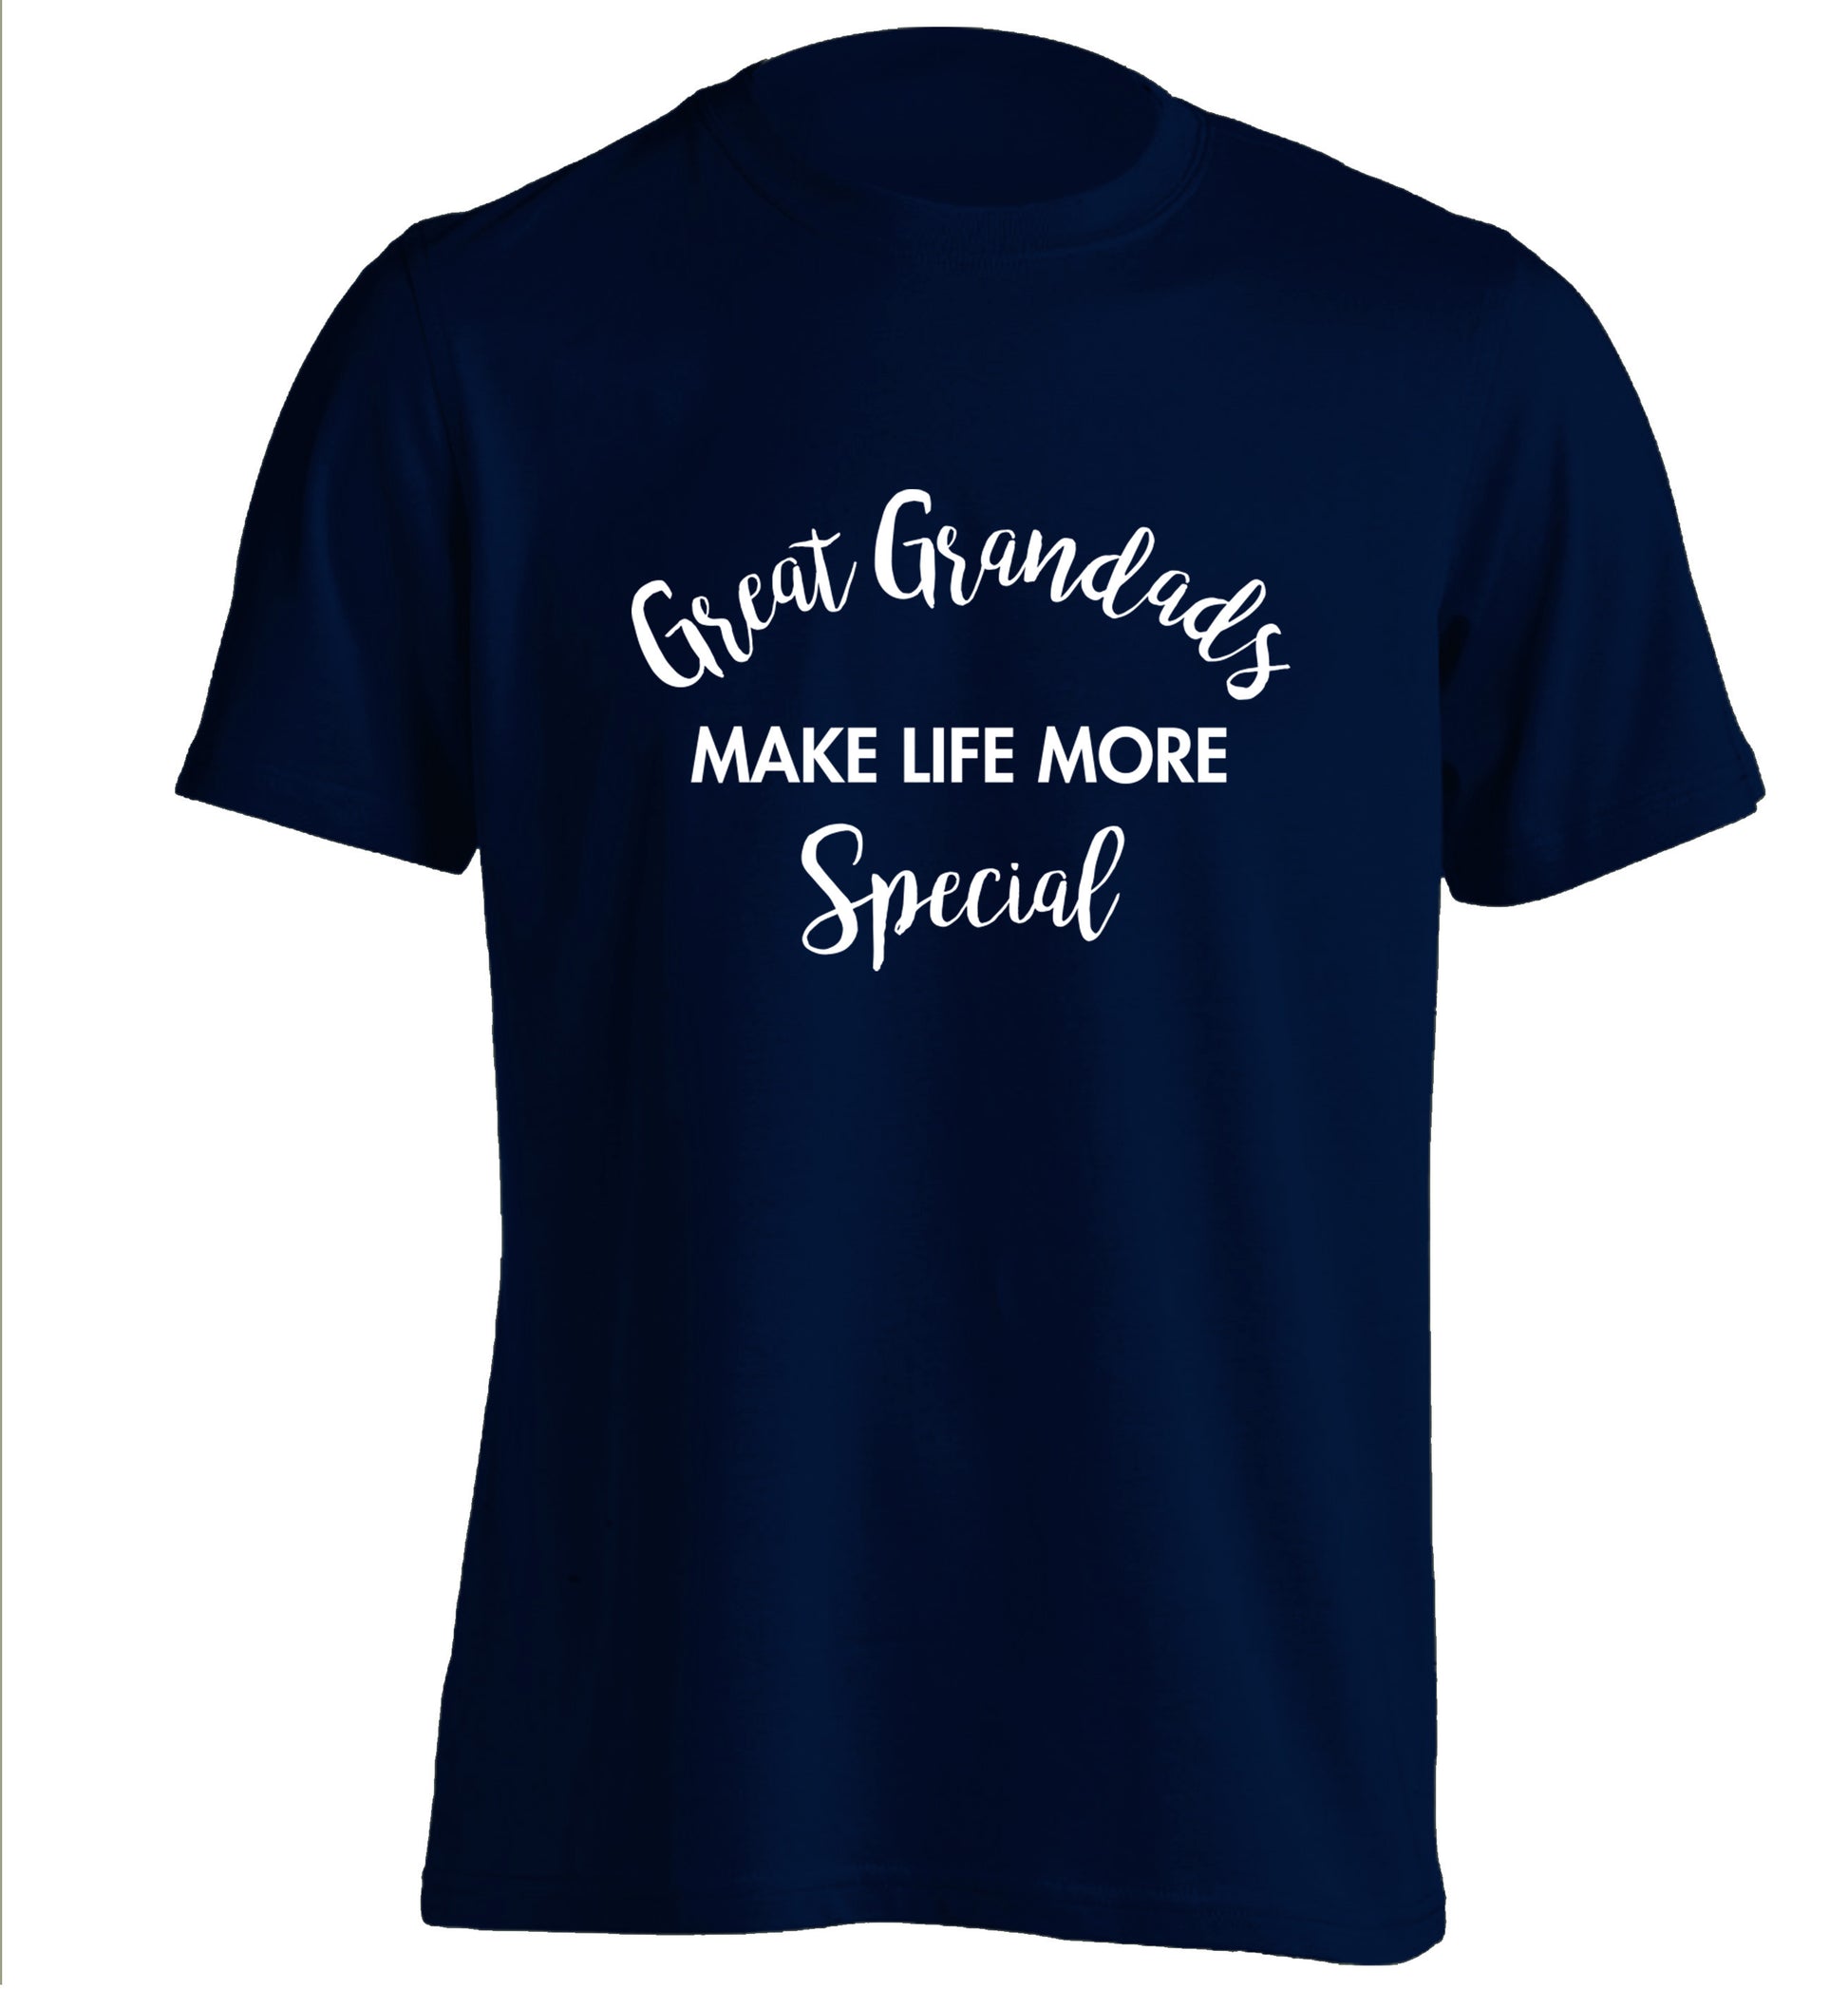 Great Grandads make life more special adults unisex navy Tshirt 2XL